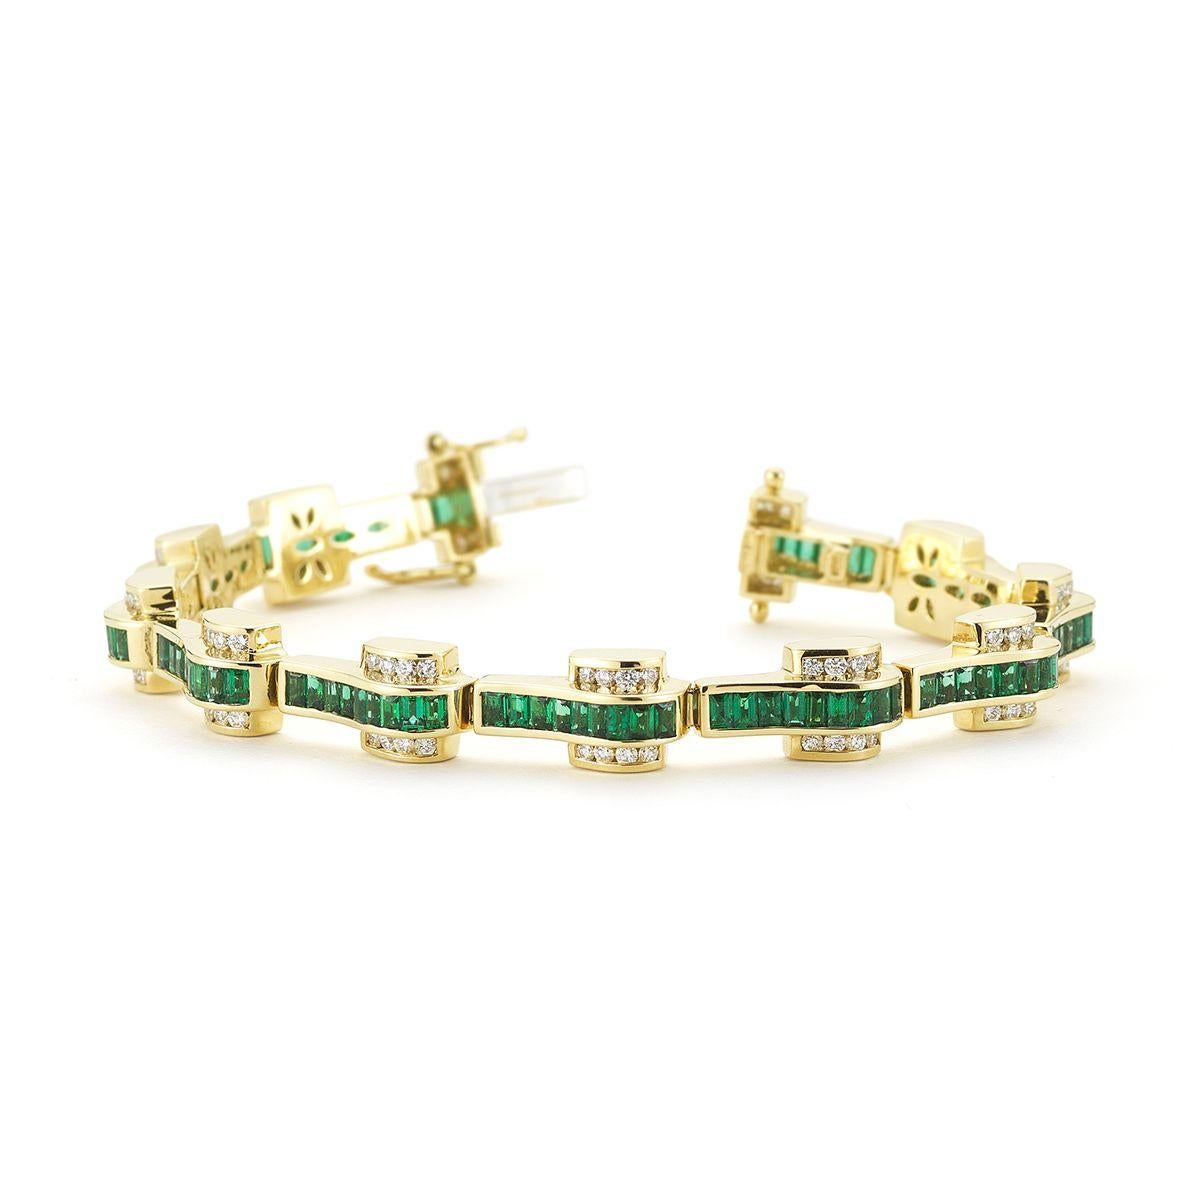 18k Yellow Gold 6.79ct Emerald And 3.6ct Diamond Tennis Bracelet

An exquisite Emerald tennis bracelet with diamond details in yellow gold
is perfect to dress up or down.
Item: # 01991
Metal: 18k Y
Lab: C.dunaigre
Color Weight: 6.79 ct.
Diamond